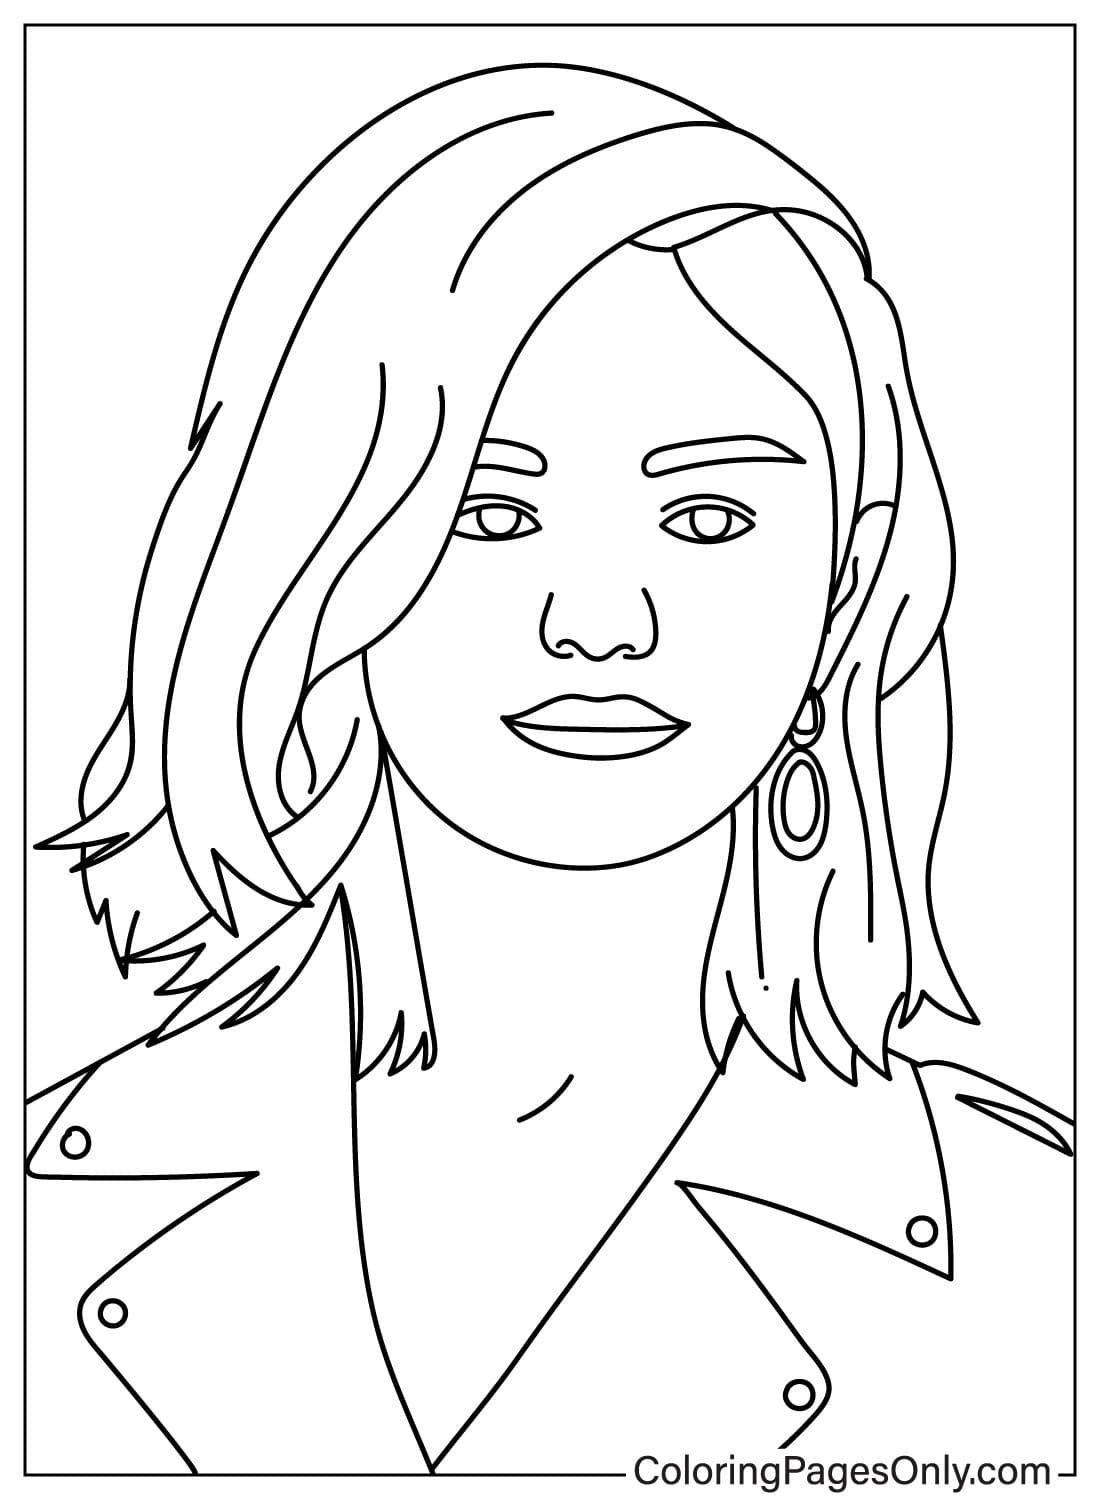 Selena Gomez Coloring Page for Adults from Selena Gomez